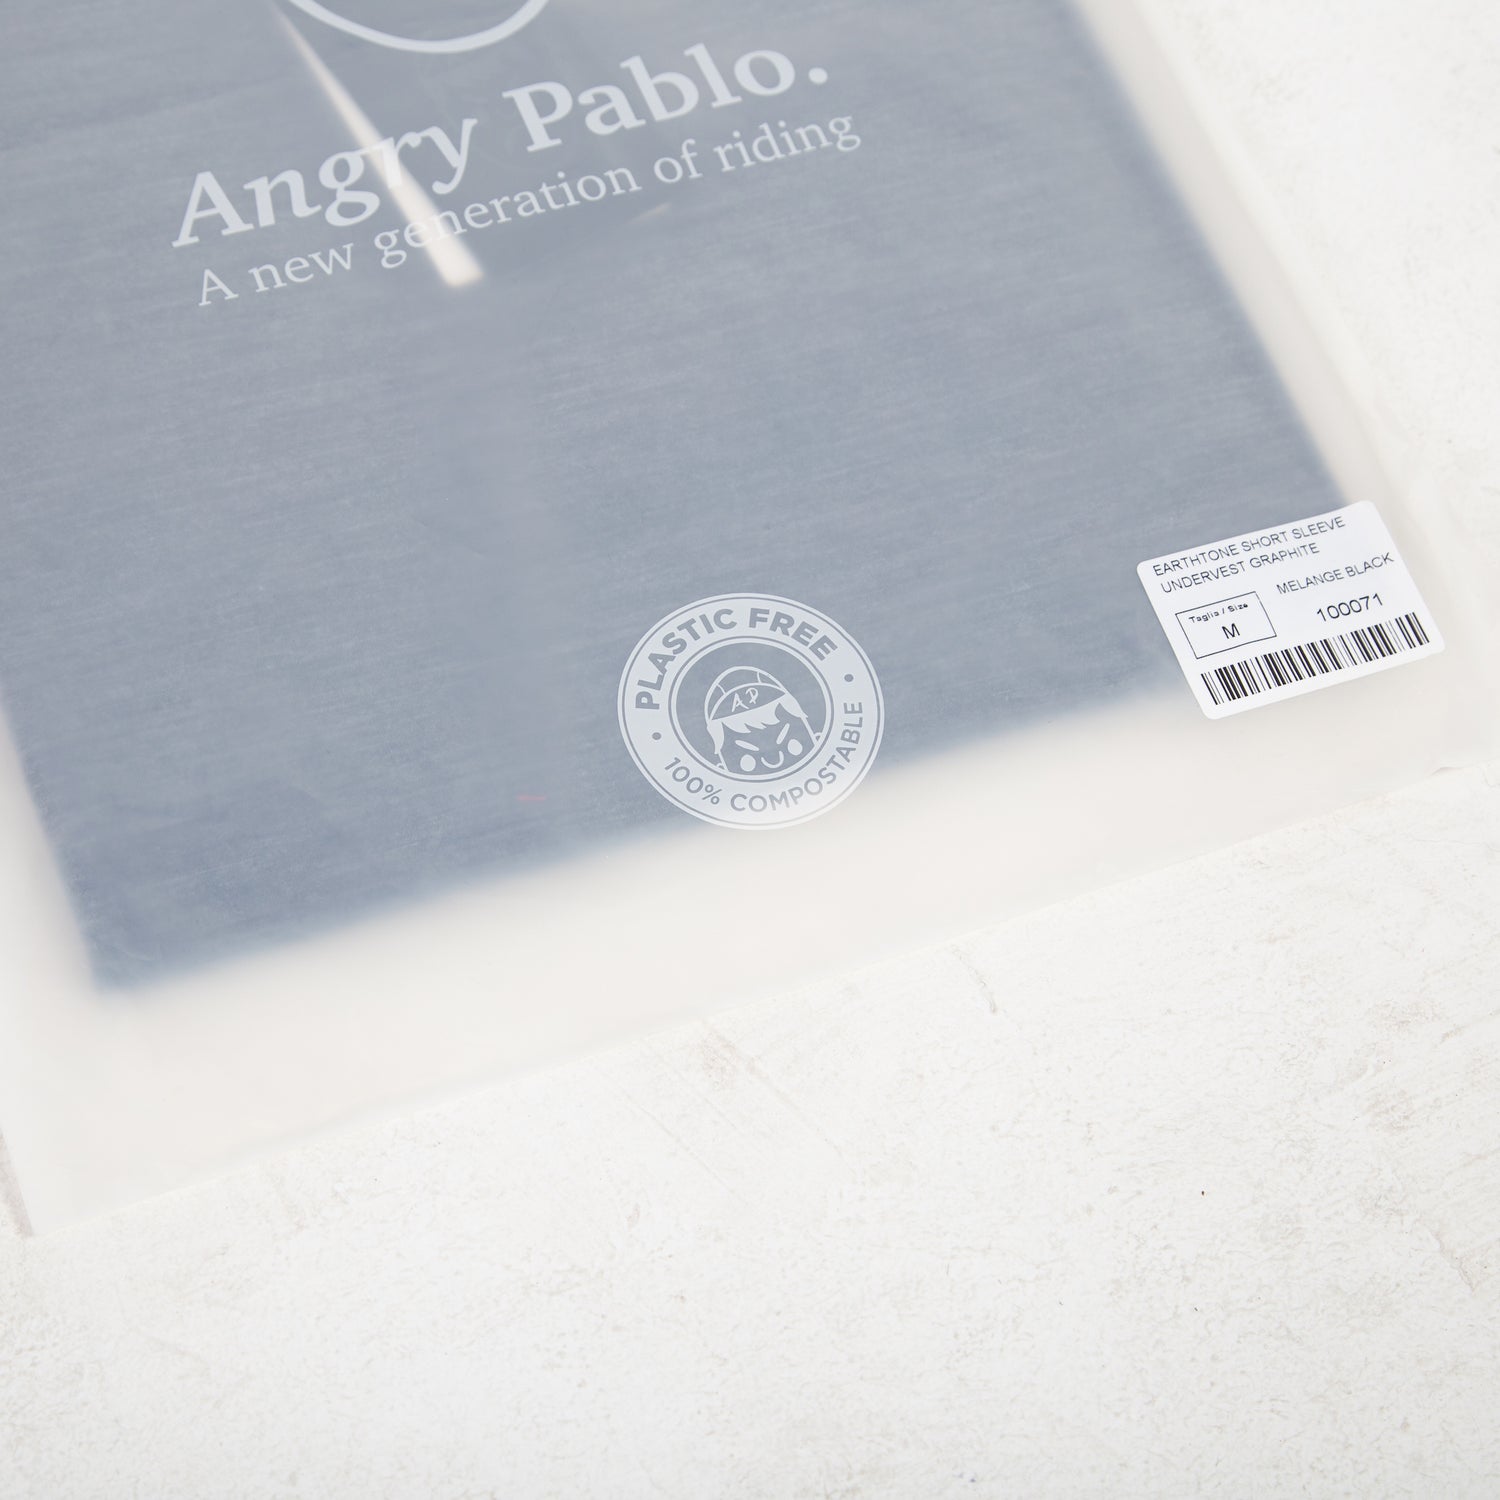 An Angry Pablo plastic free compostable packaging bag